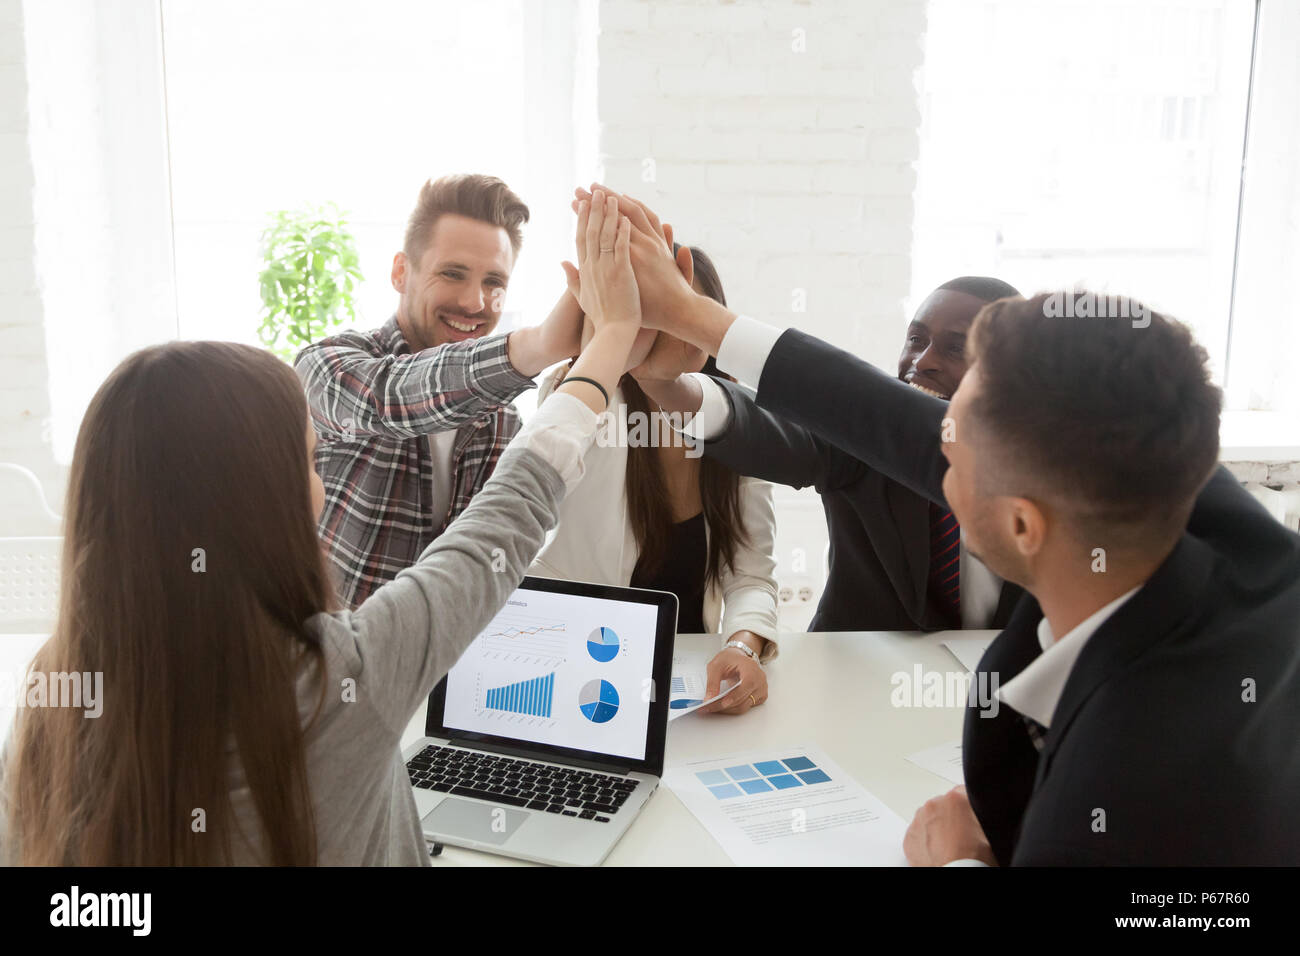 Colleagues giving high five celebrating goal achievement Stock Photo